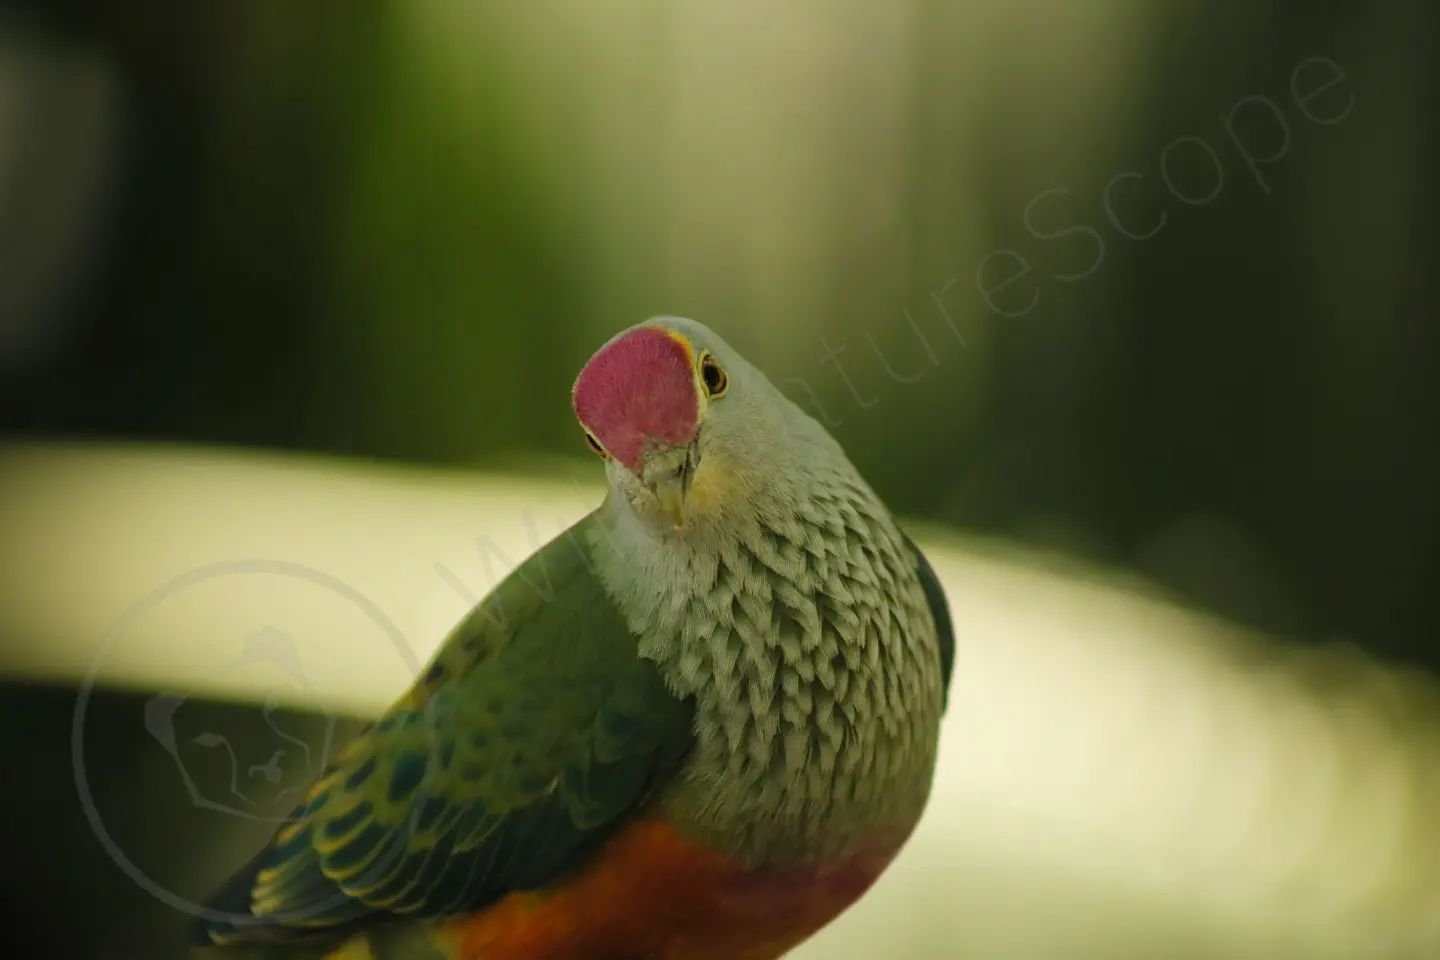 The Rose Crowned Fruit Dove is a native Australian bird found in the lowland rainforests of northern and eastern Australia, fortunately, this dove is listed as &quot;Least Concern&quot; on the IUCN Red list of threatened species. You can visit this b